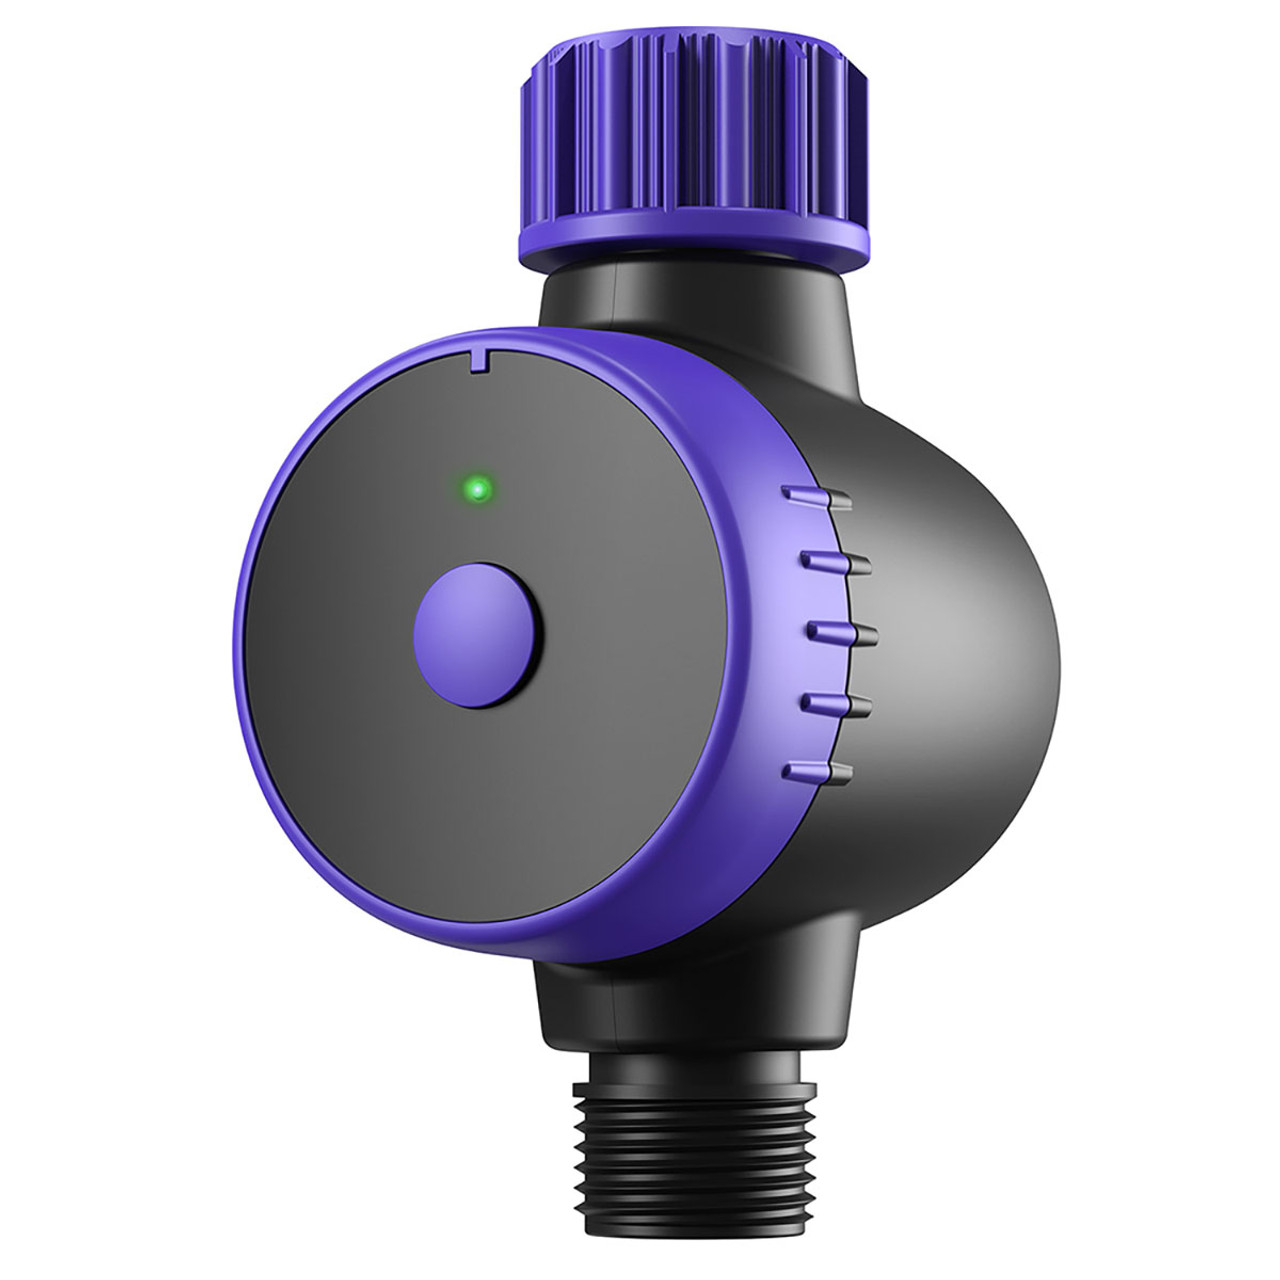 Smart Watering Timer, Automatic Garden Irrigation with Remote App product image